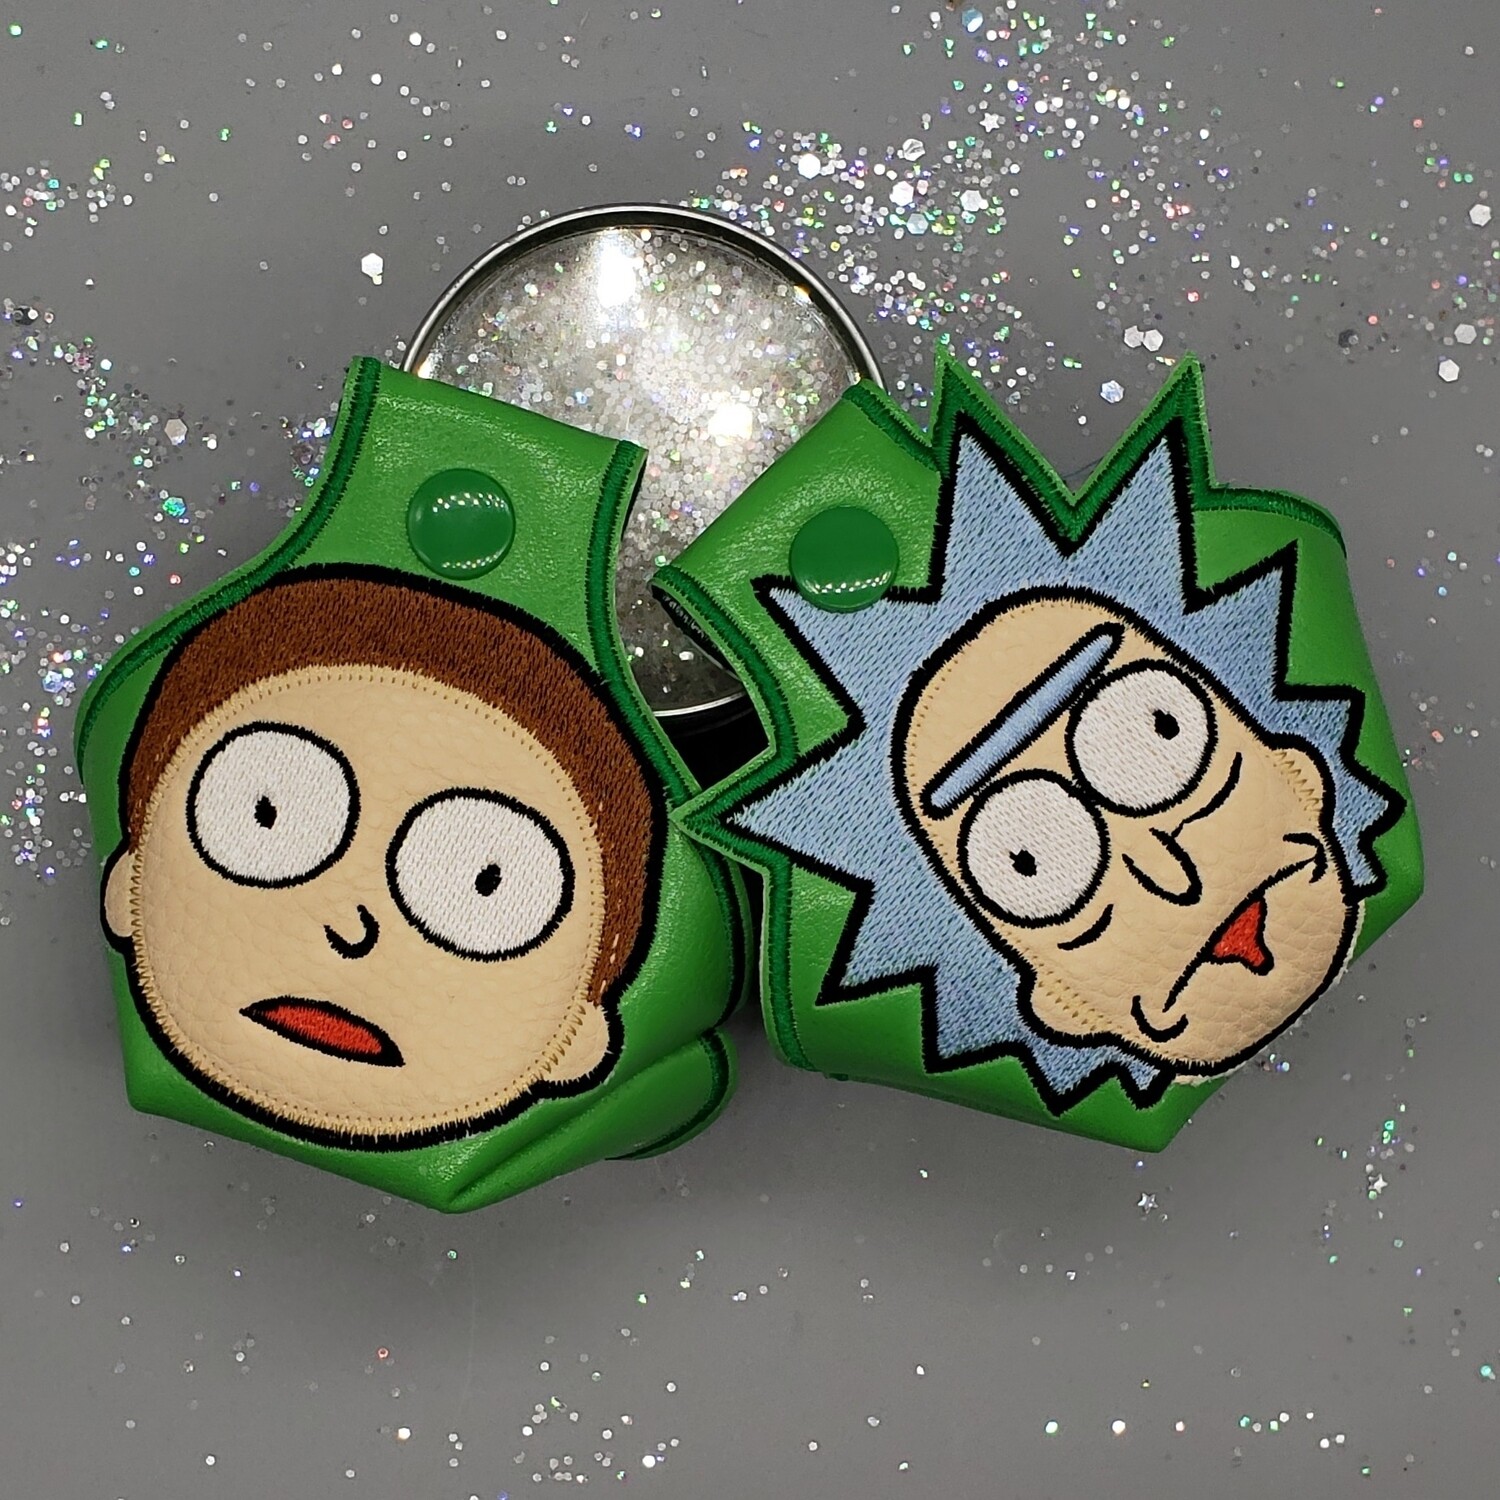 Rick and/or Morty Toe guards